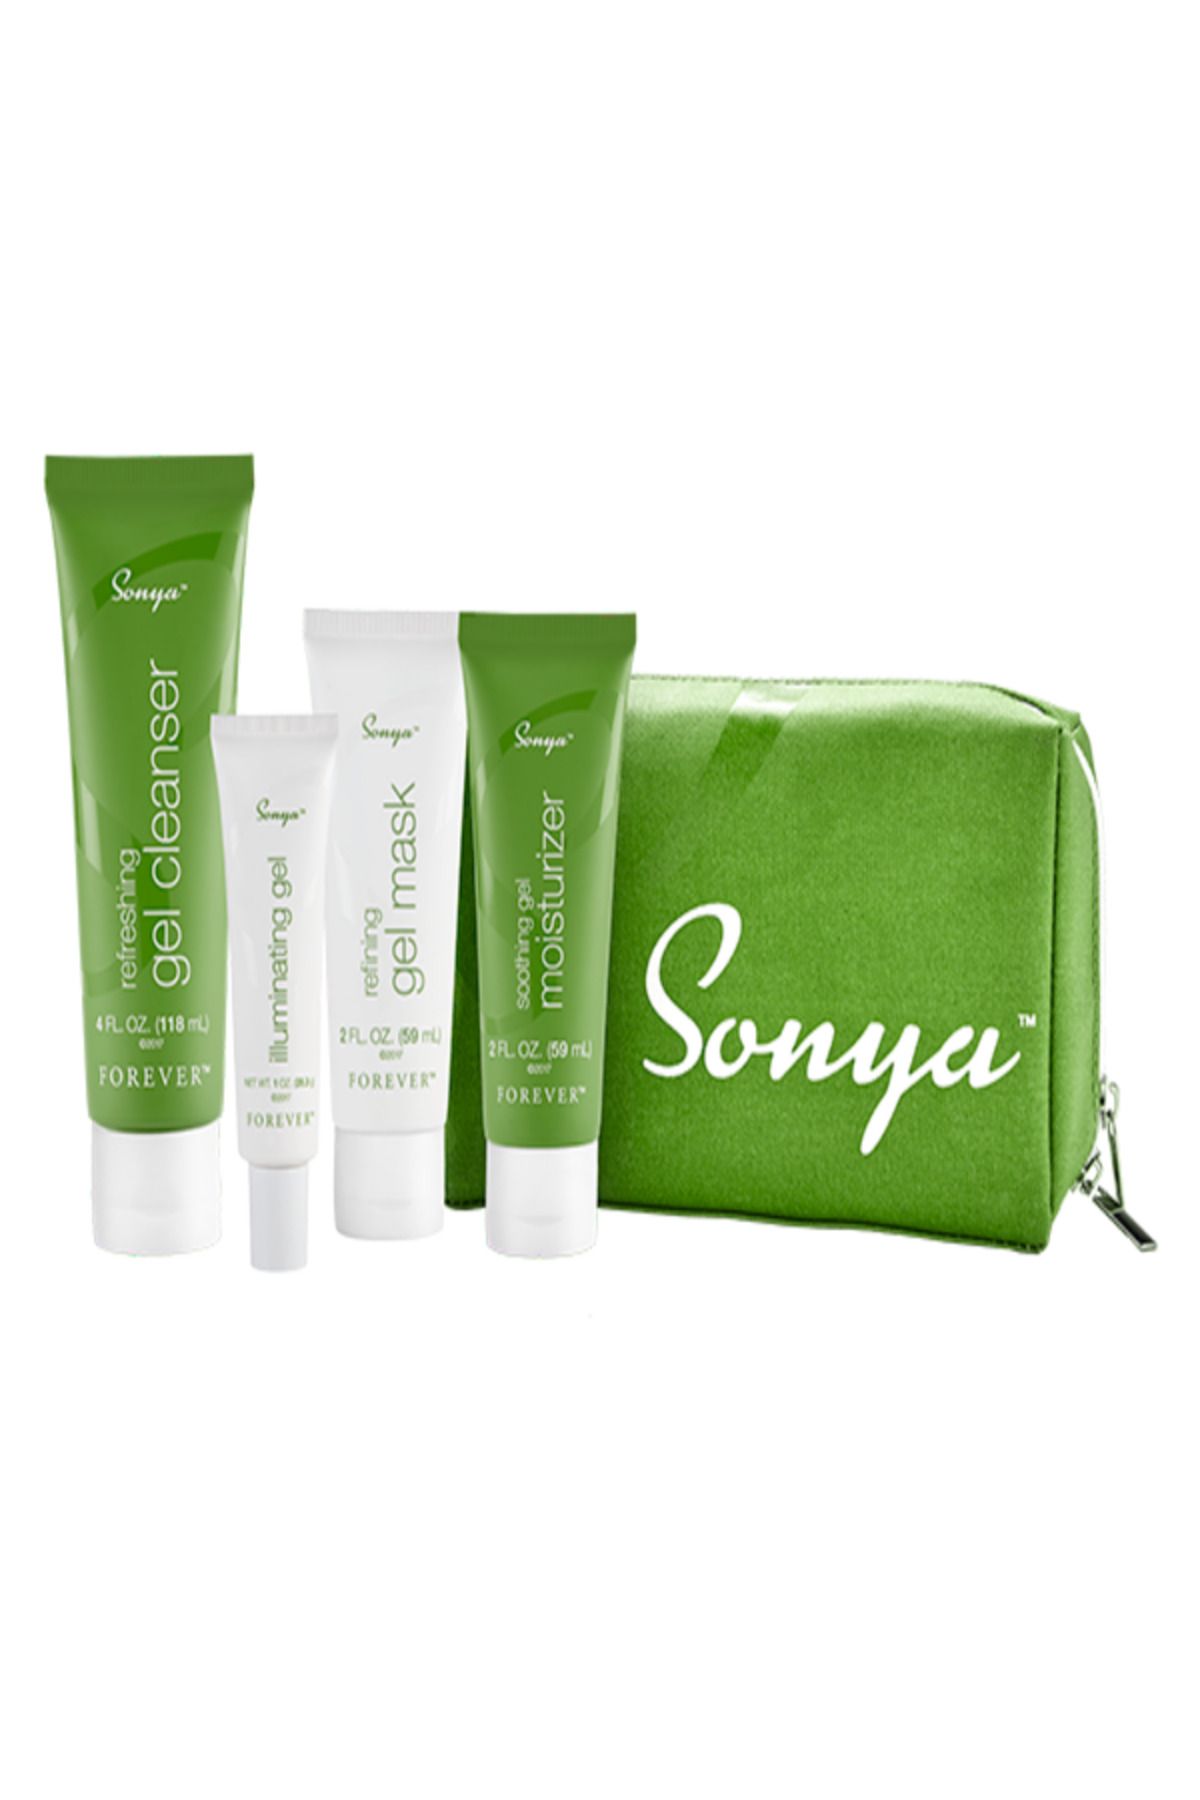 Forever Living Products Sonya Daily Skincare Kit